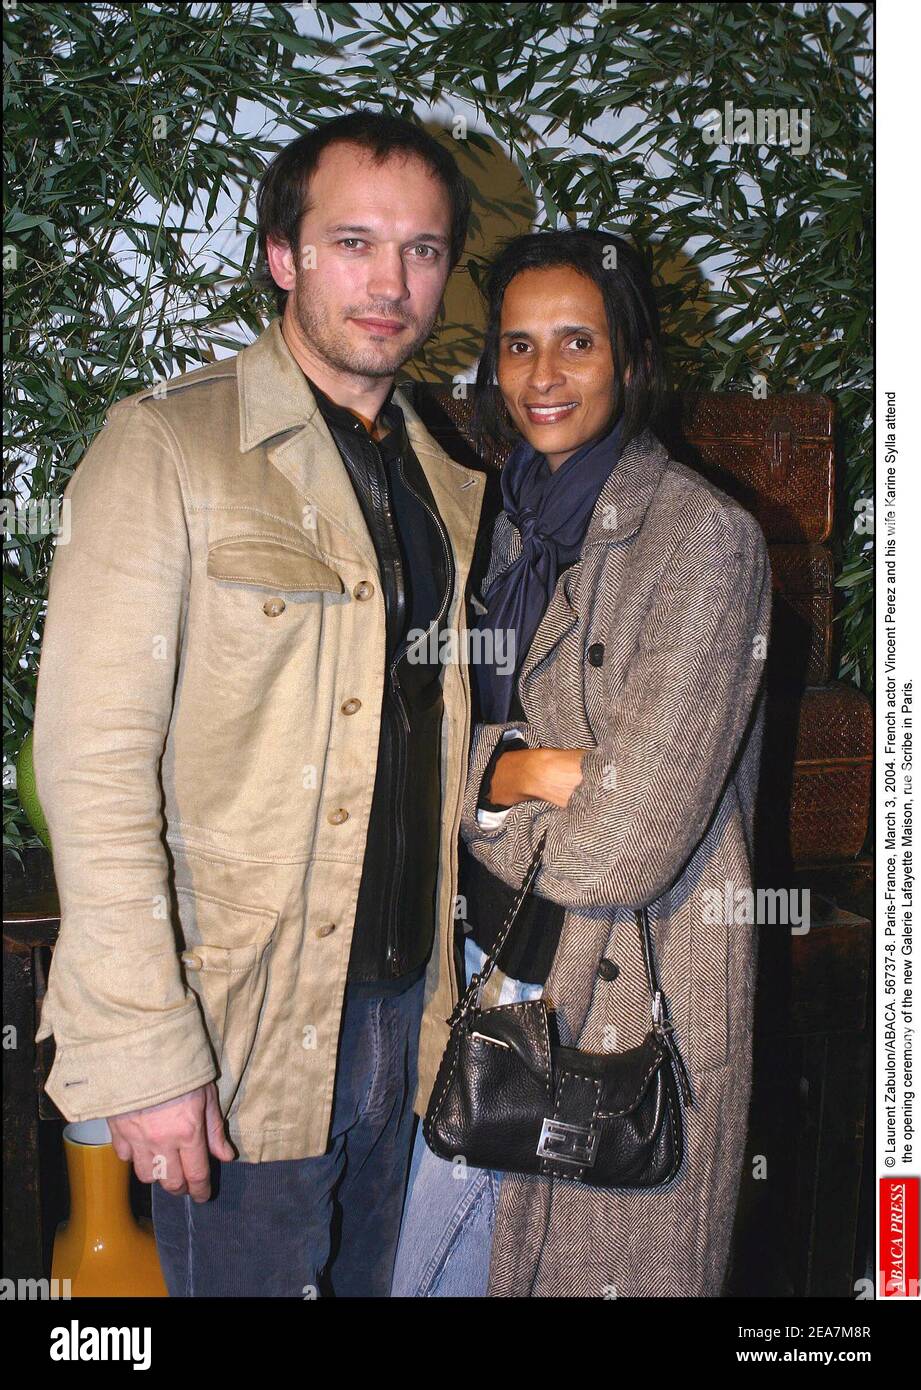 © Laurent Zabulon/ABACA. 56737-8. Paris-France, March 3, 2004. Swiss actor Vincent Perez and his wife Karine Sylla attend the opening ceremony of the new Galerie Lafayette Maison, rue Scribe in Paris. Stock Photo